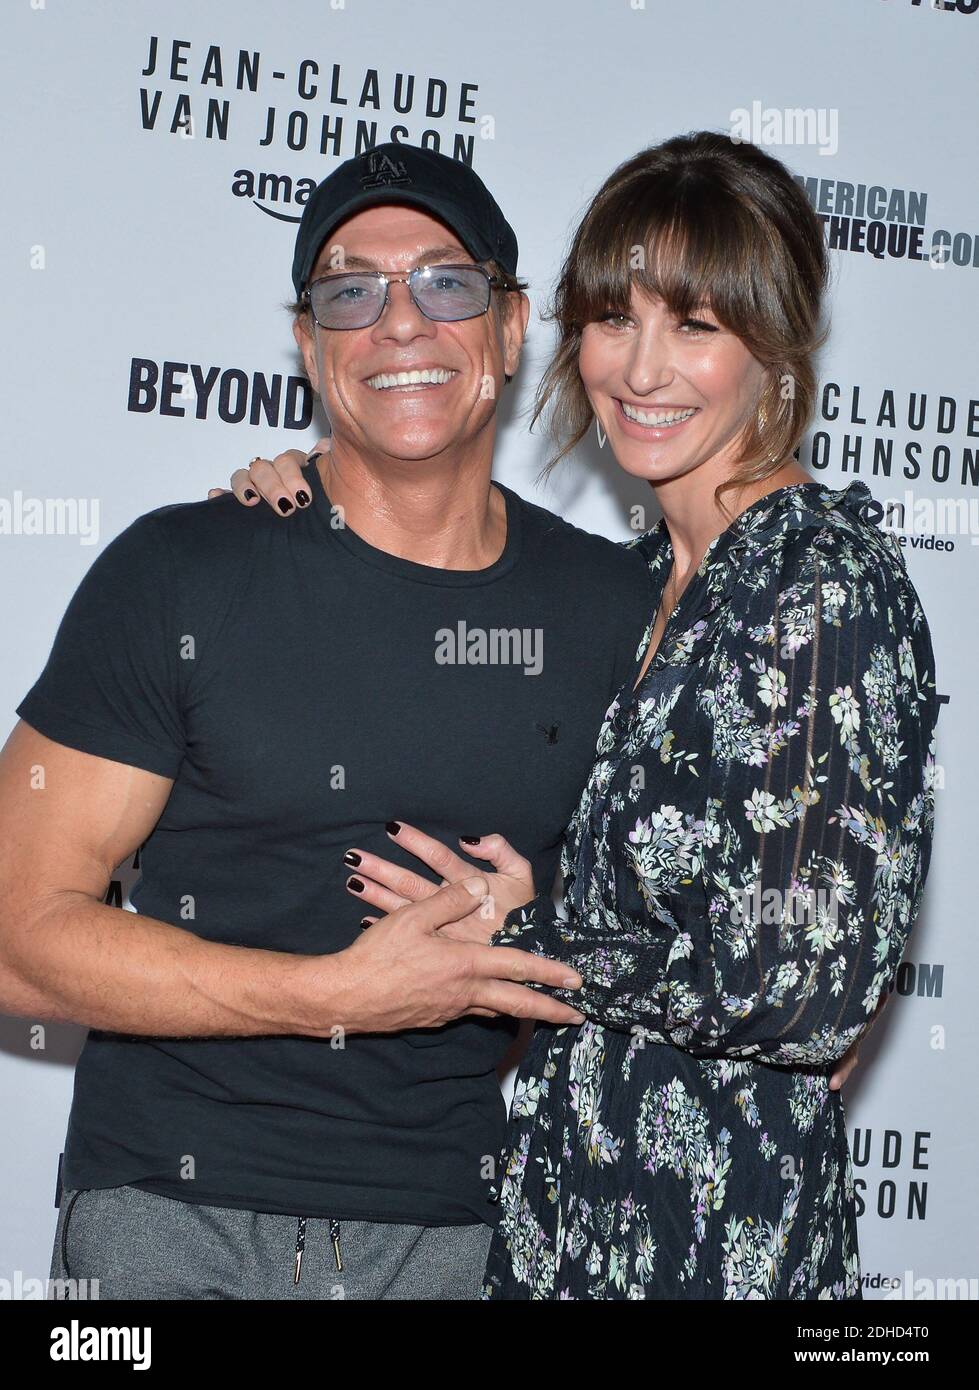 ethics Time series Idol Jean-Claude Van Damme and Kat Foster attend the Beyond Fest screening and  Cast/Creator panel of Amazon Prime Video's exclusive series 'Jean-Claude Van  Johnson' at the Egyptian Theatre on October 9, 2017 in